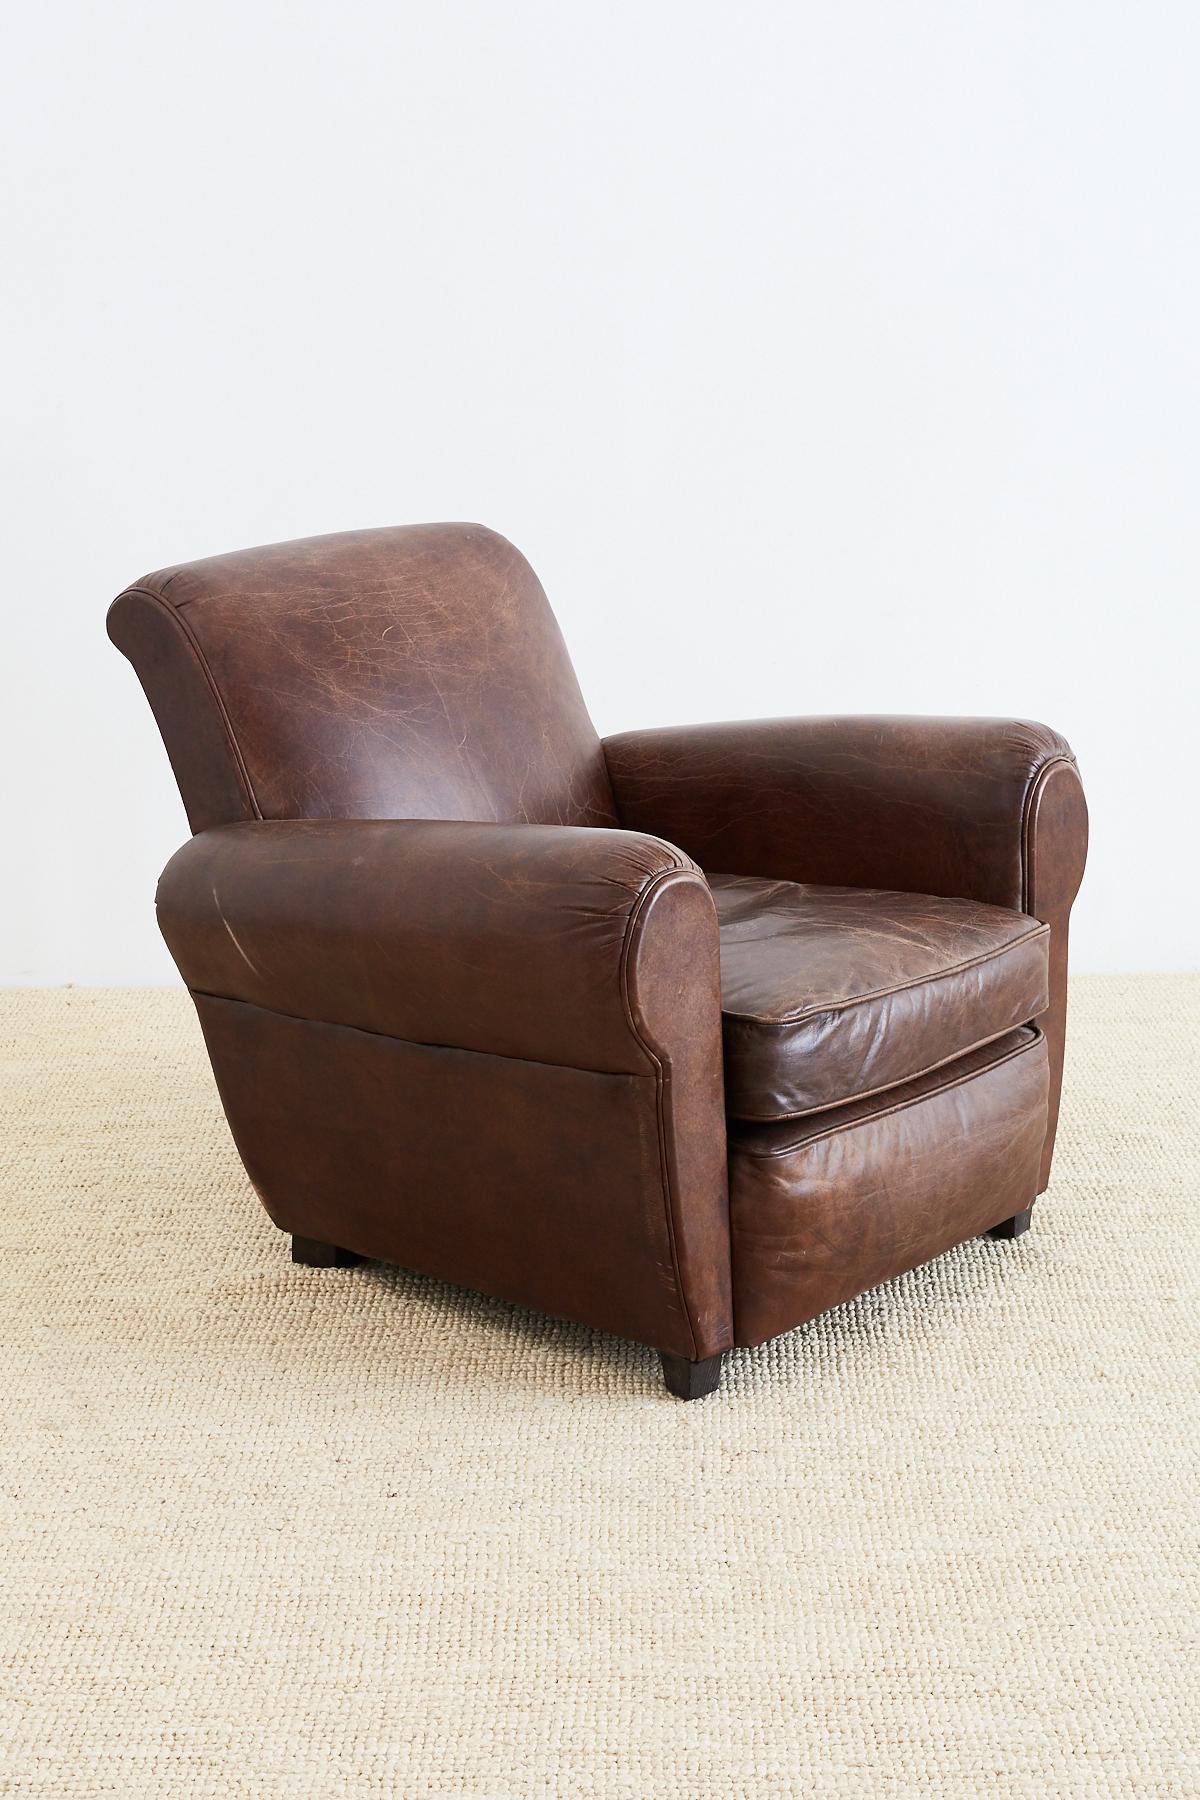 Hand-Crafted French Art Deco Style Cigar Leather Club Chairs